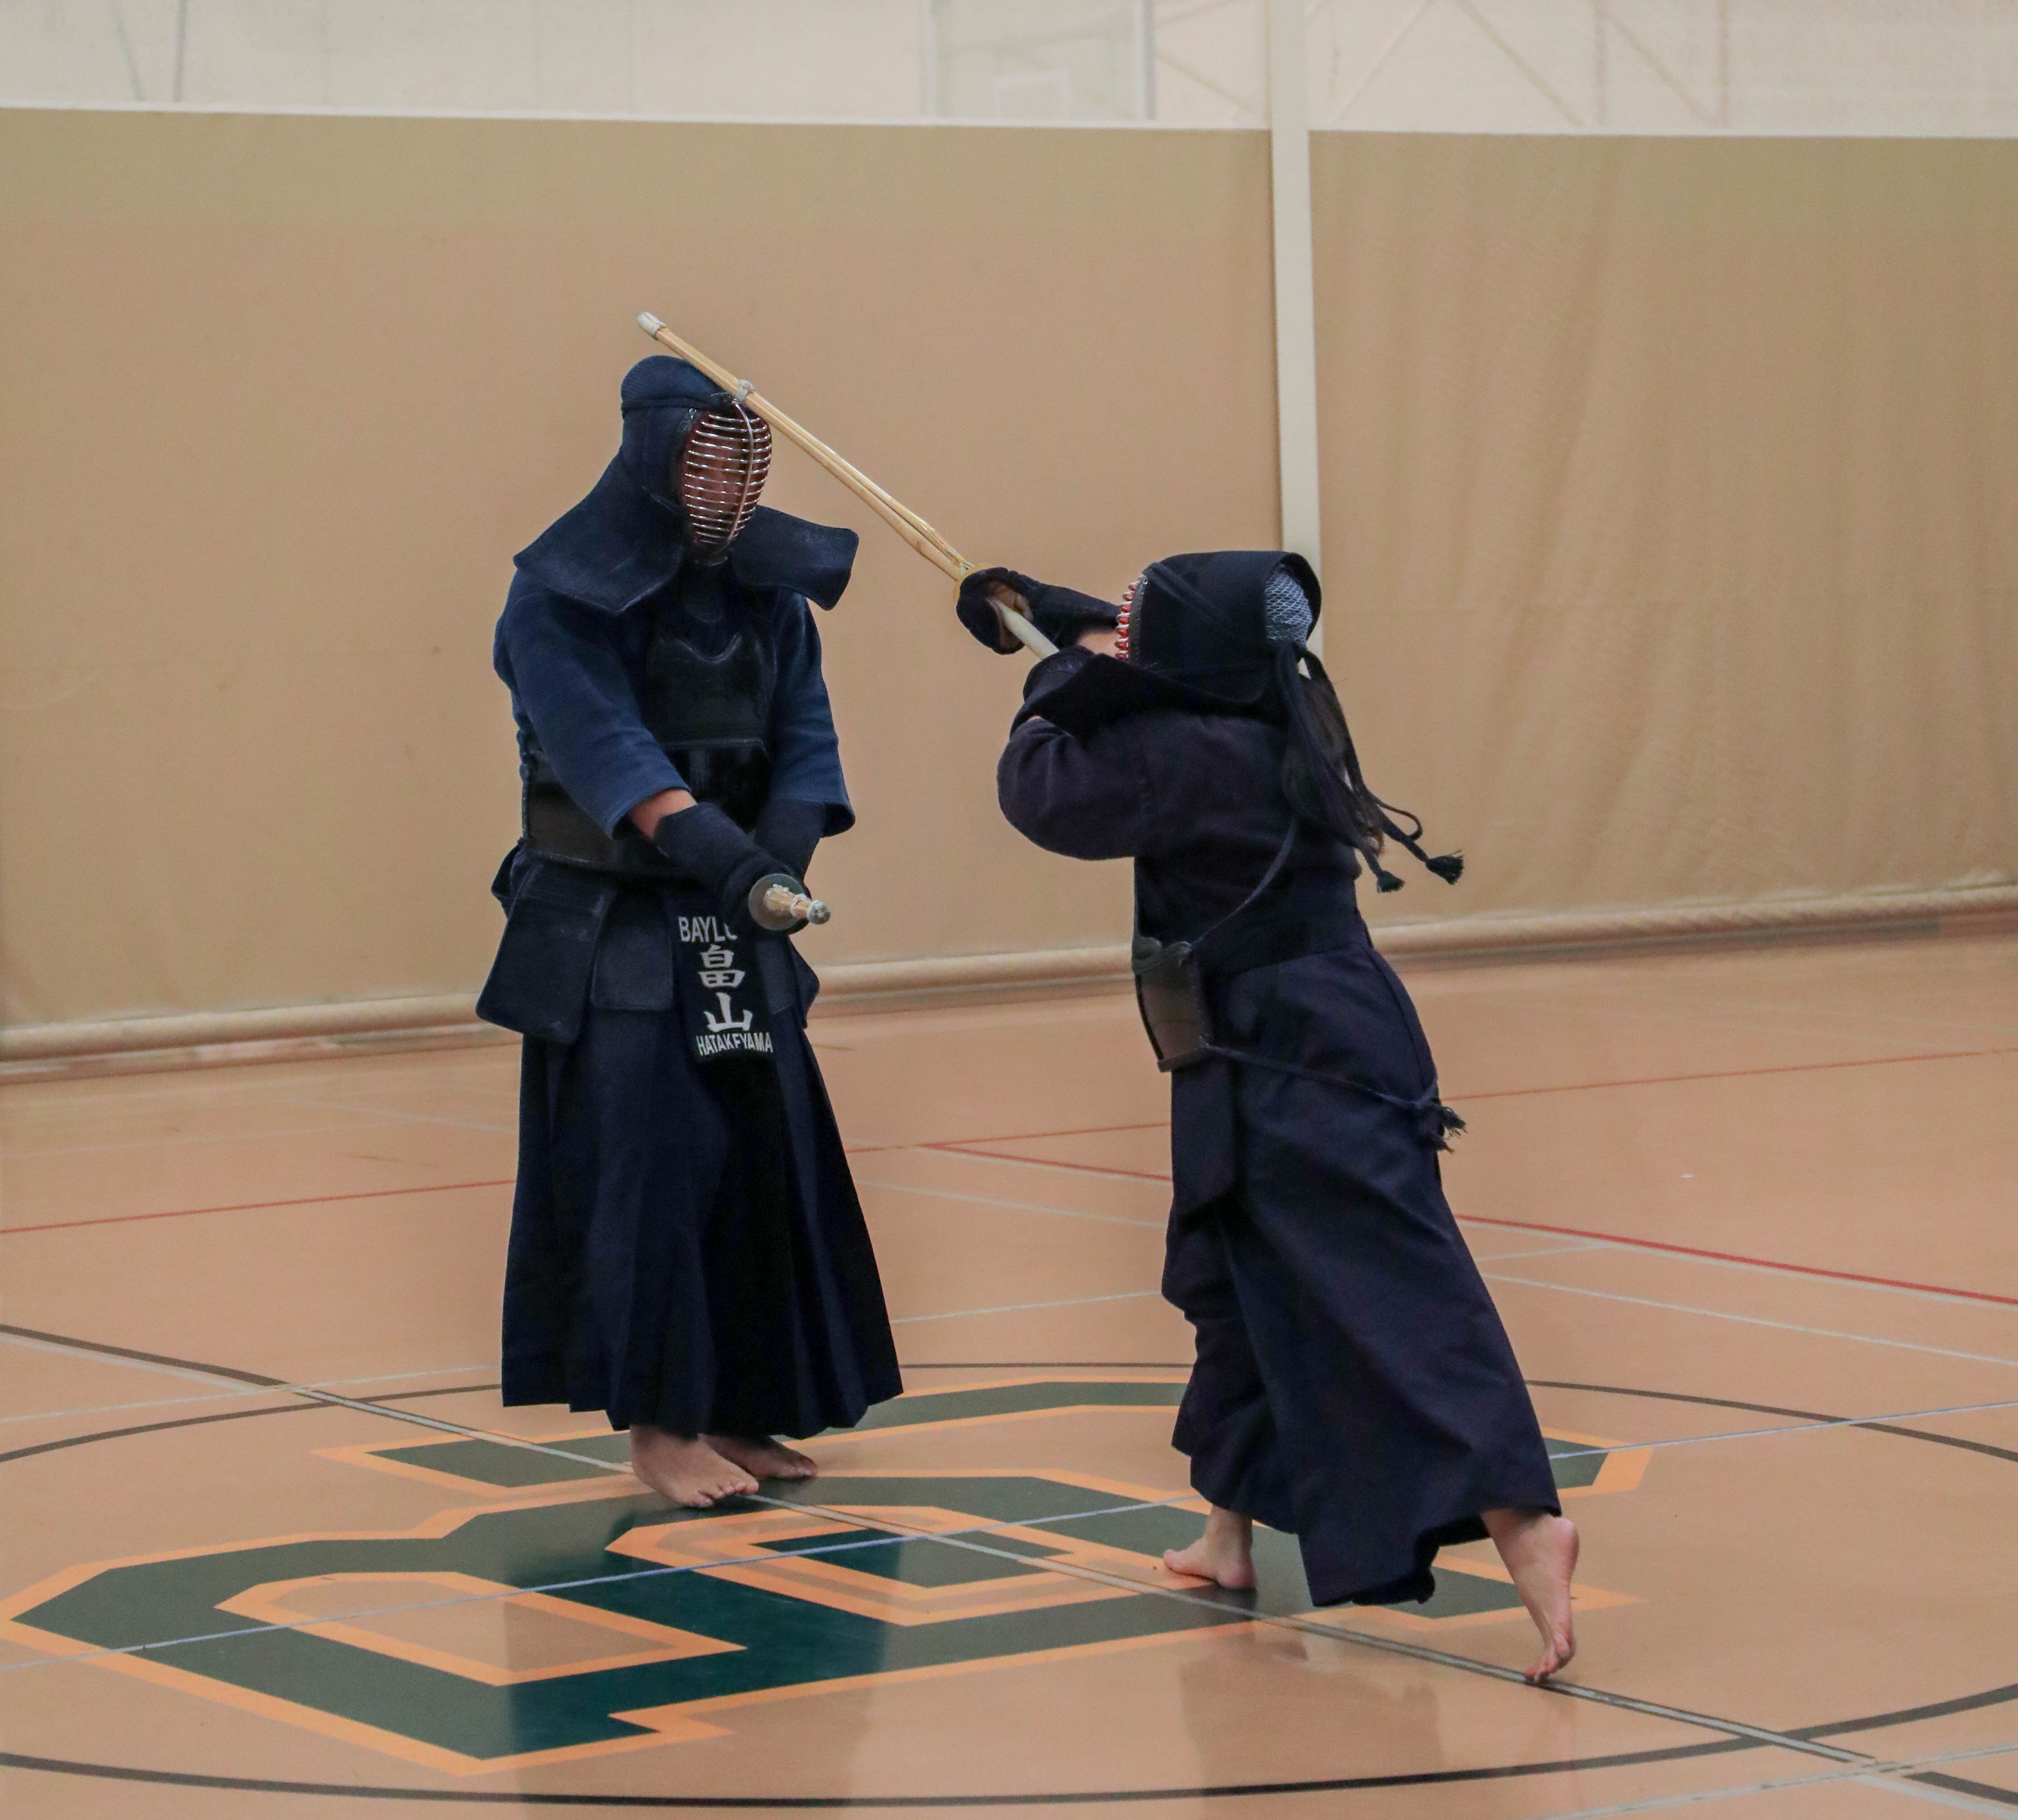 Japanese culture celebrated through Baylor Kendo Club | The Baylor Lariat